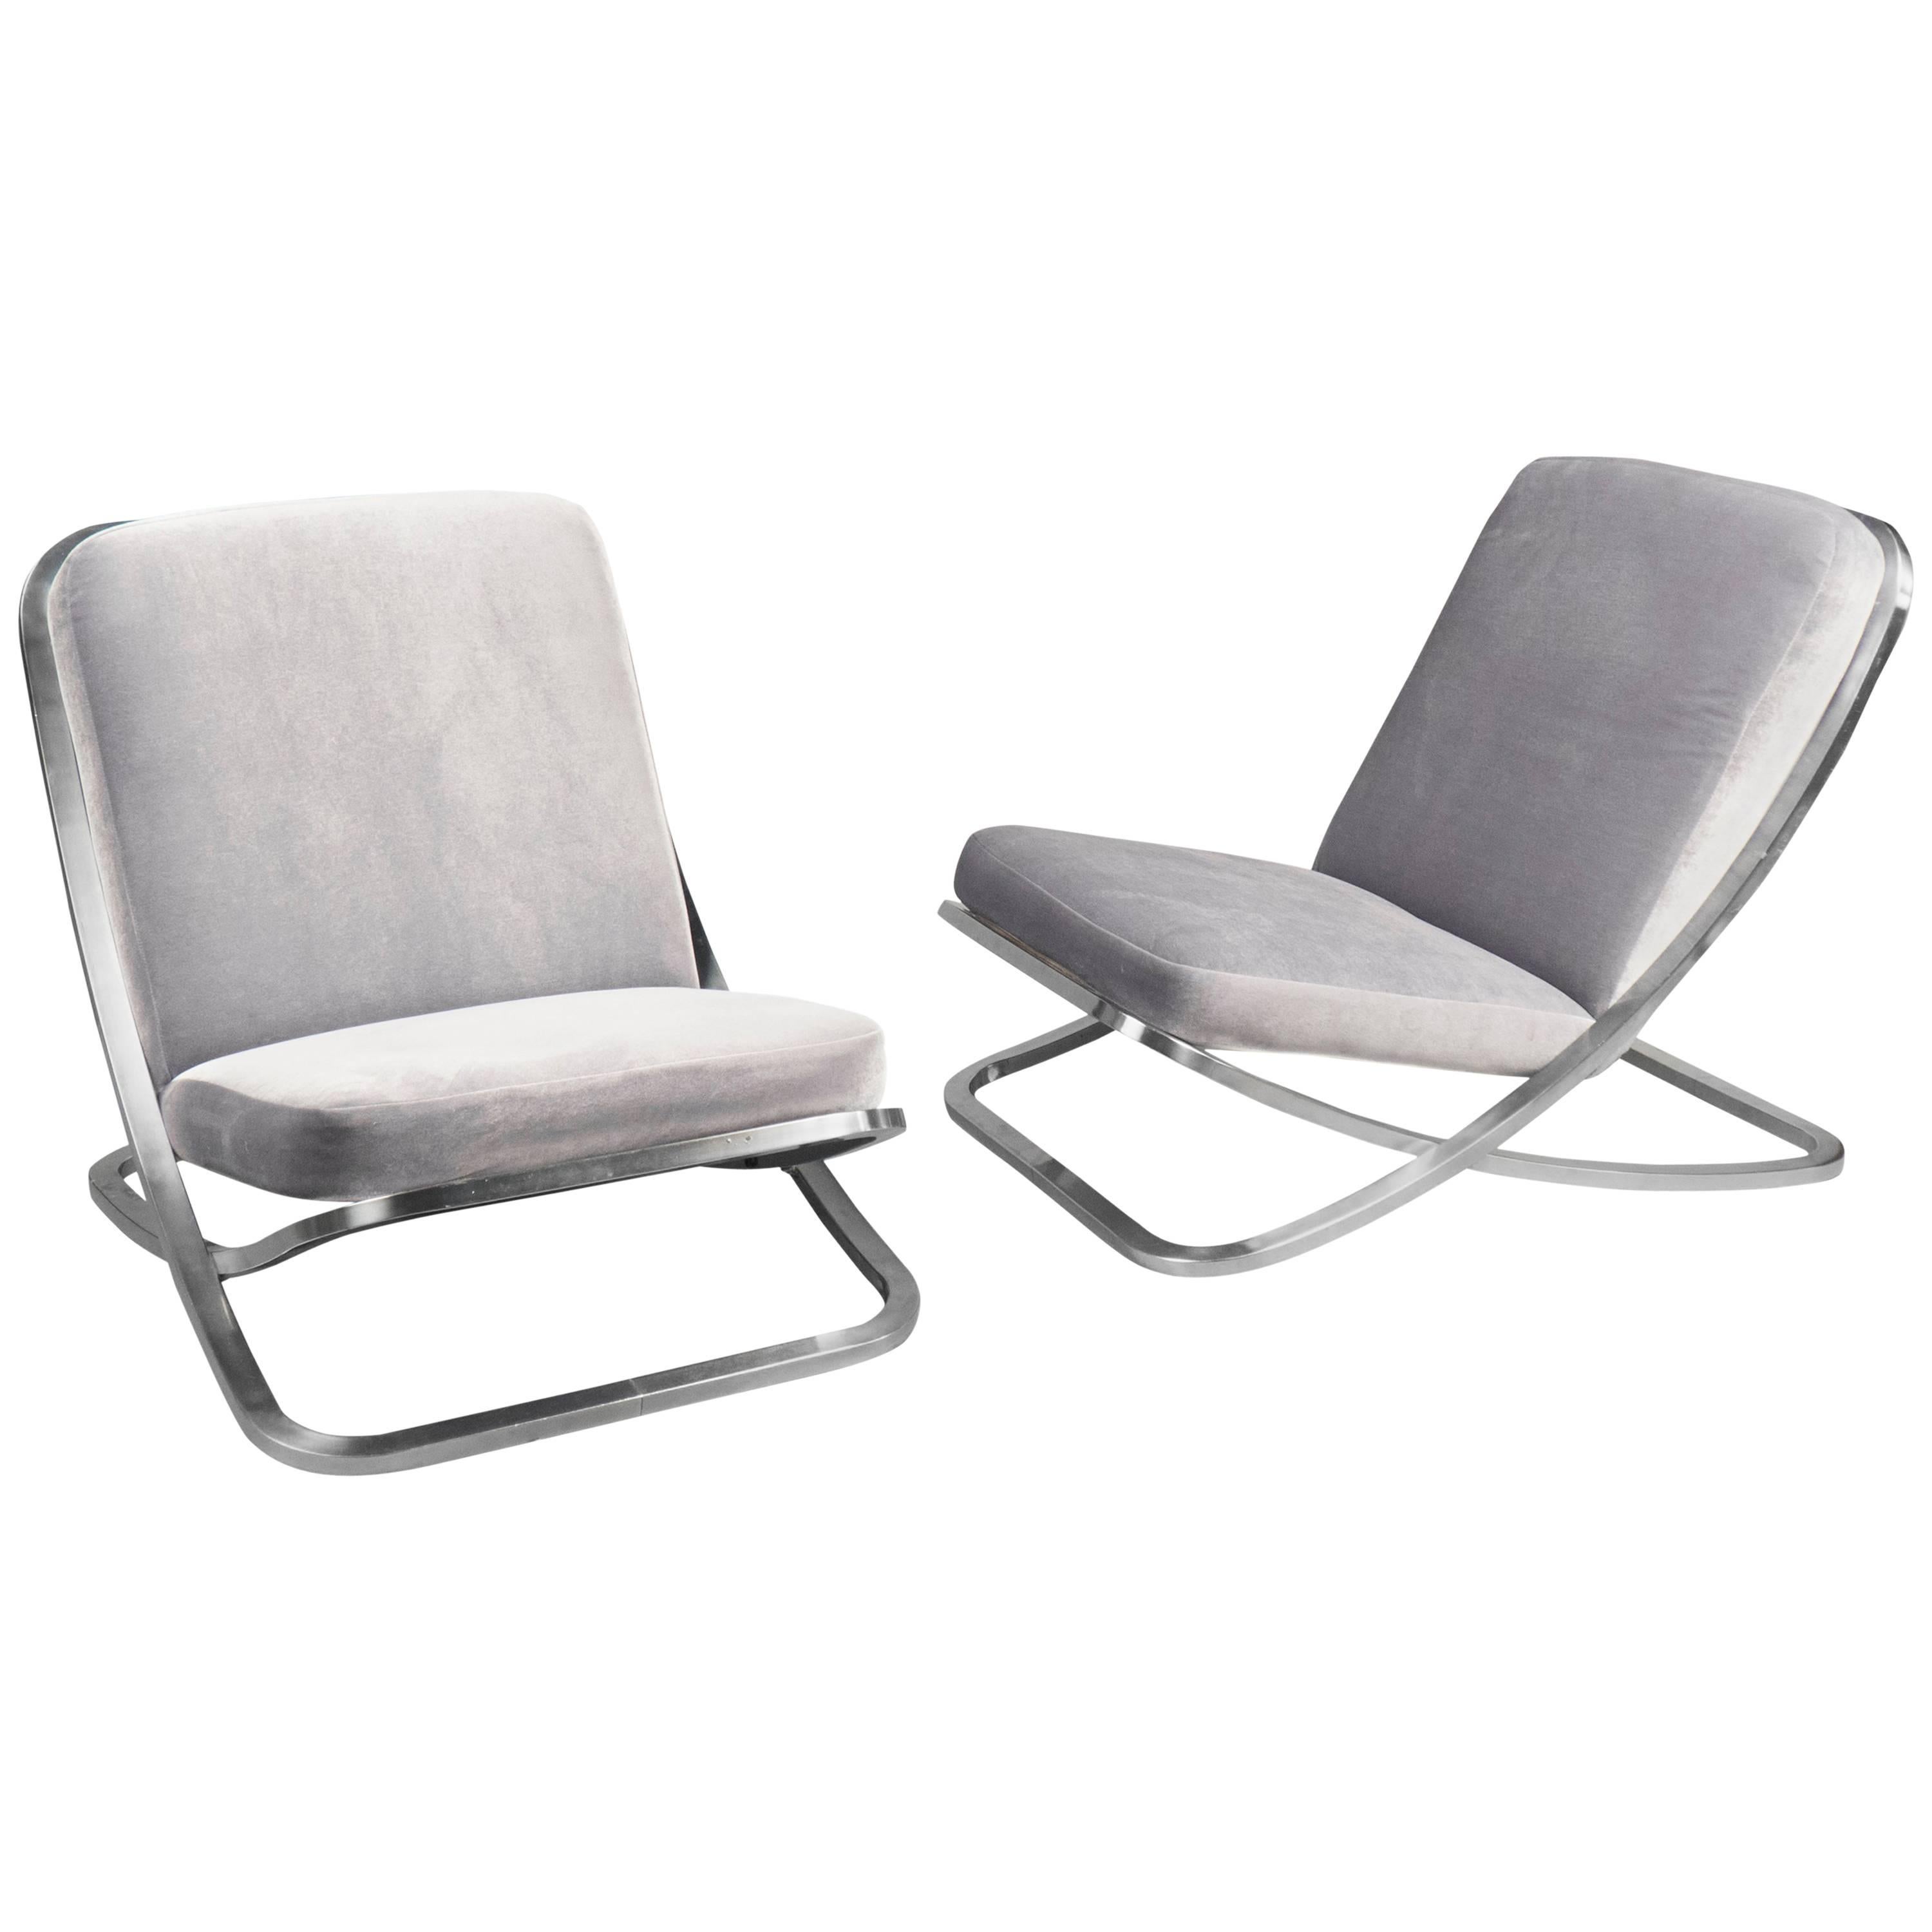 Pair of Low Nickel Slipper Chairs, France, 1970s